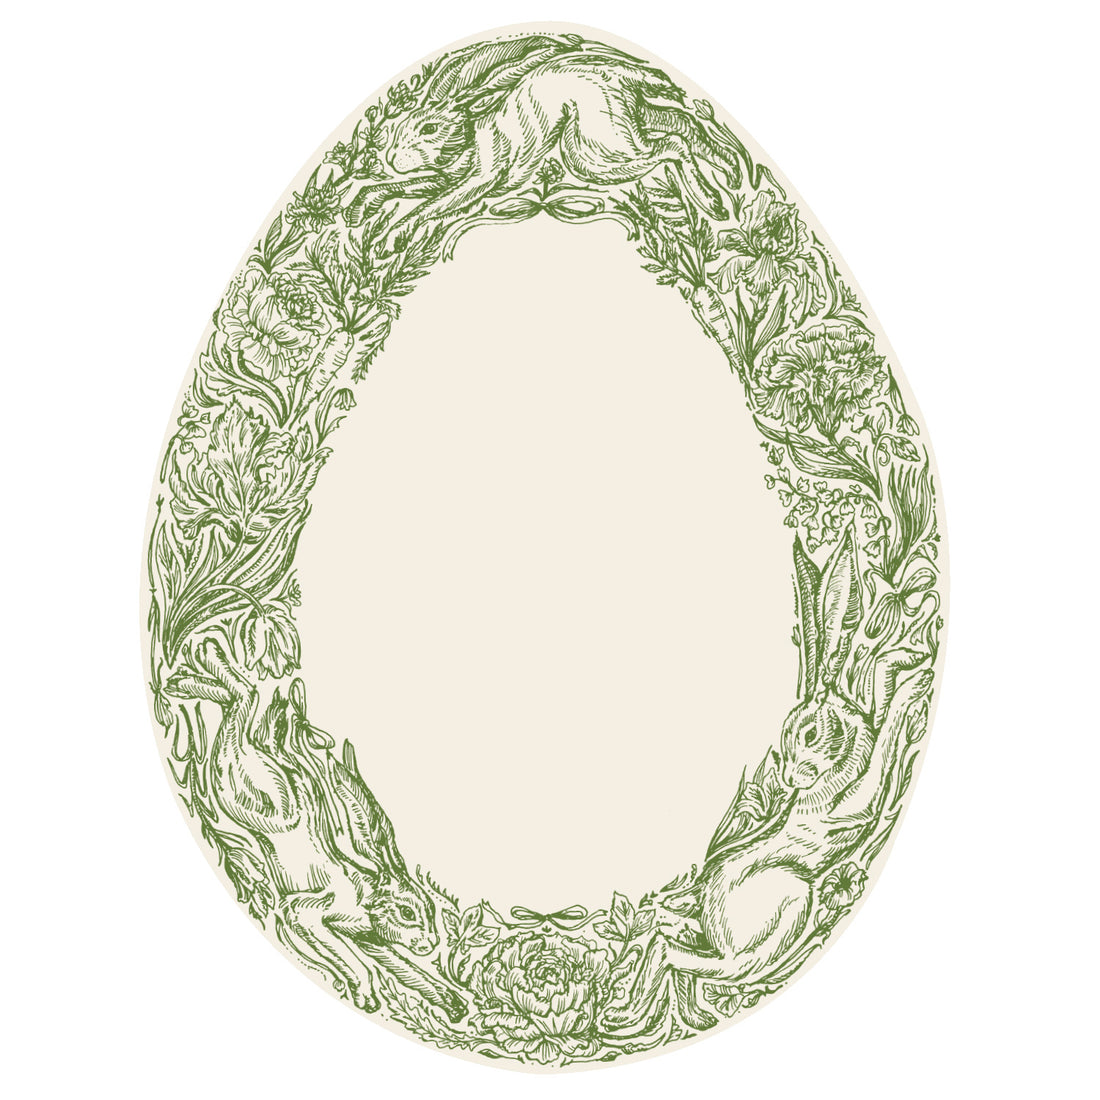 An egg-shaped card framed with a densely packed floral and hare design in green linework, creating an open white space in the middle for personalization.